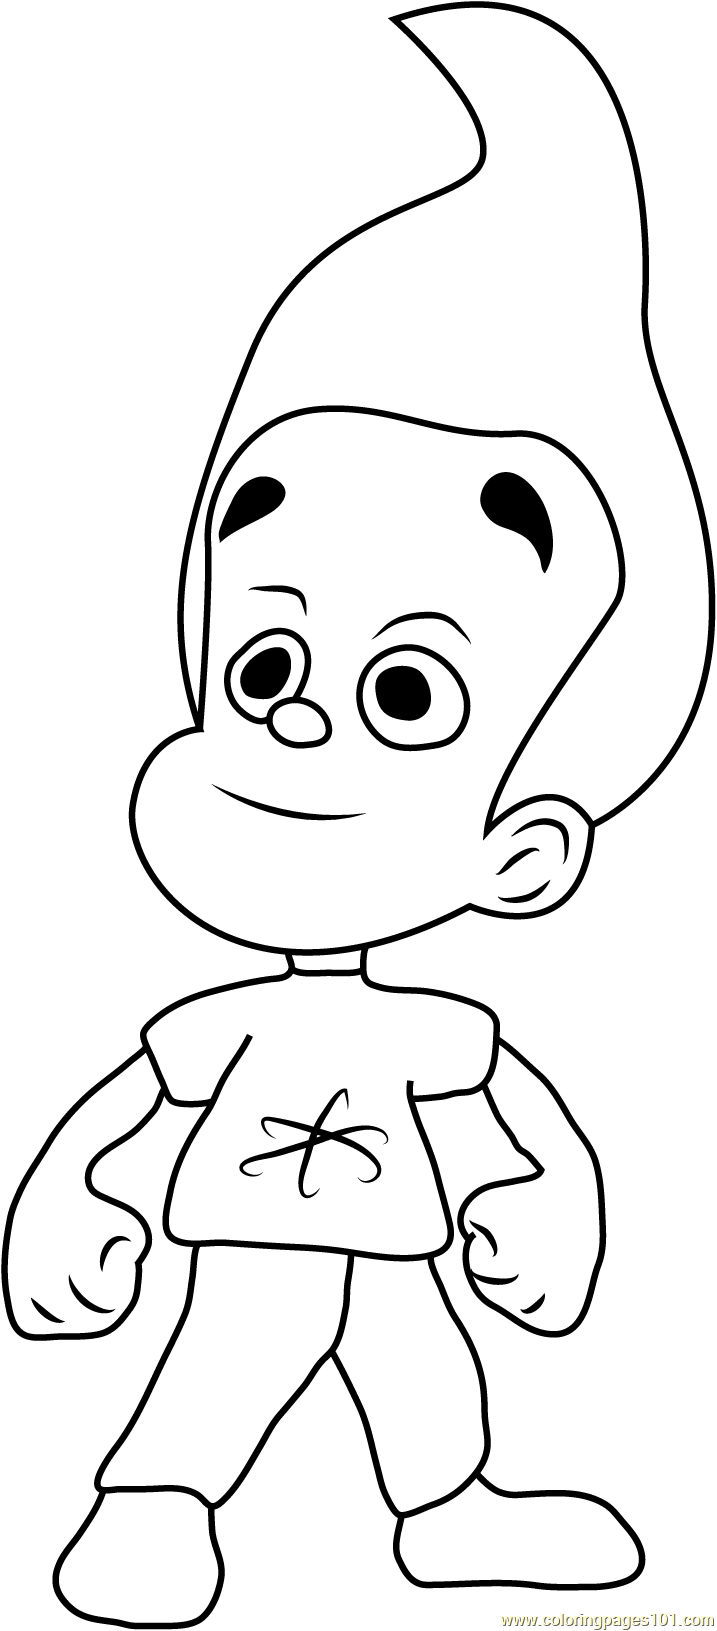 Cute Jimmy Neutron Coloring Page - Free The Adventures of Jimmy Neutron